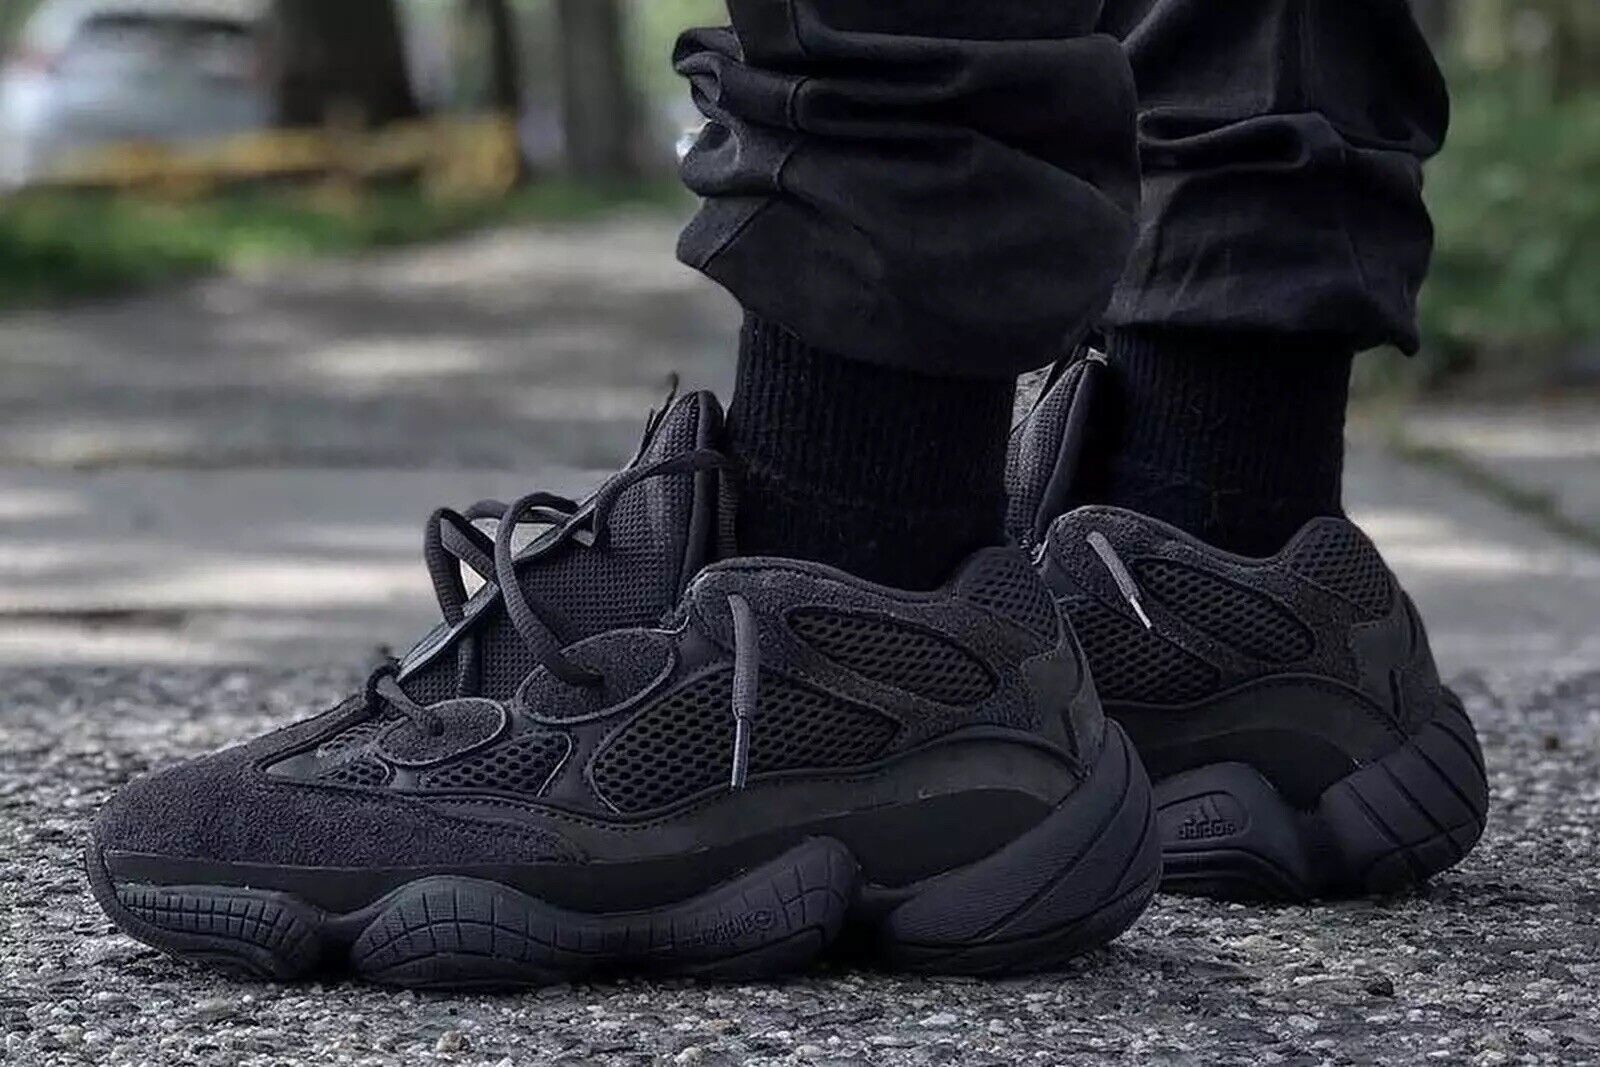 The Yeezy 500 Utility Black Provides and | eBay